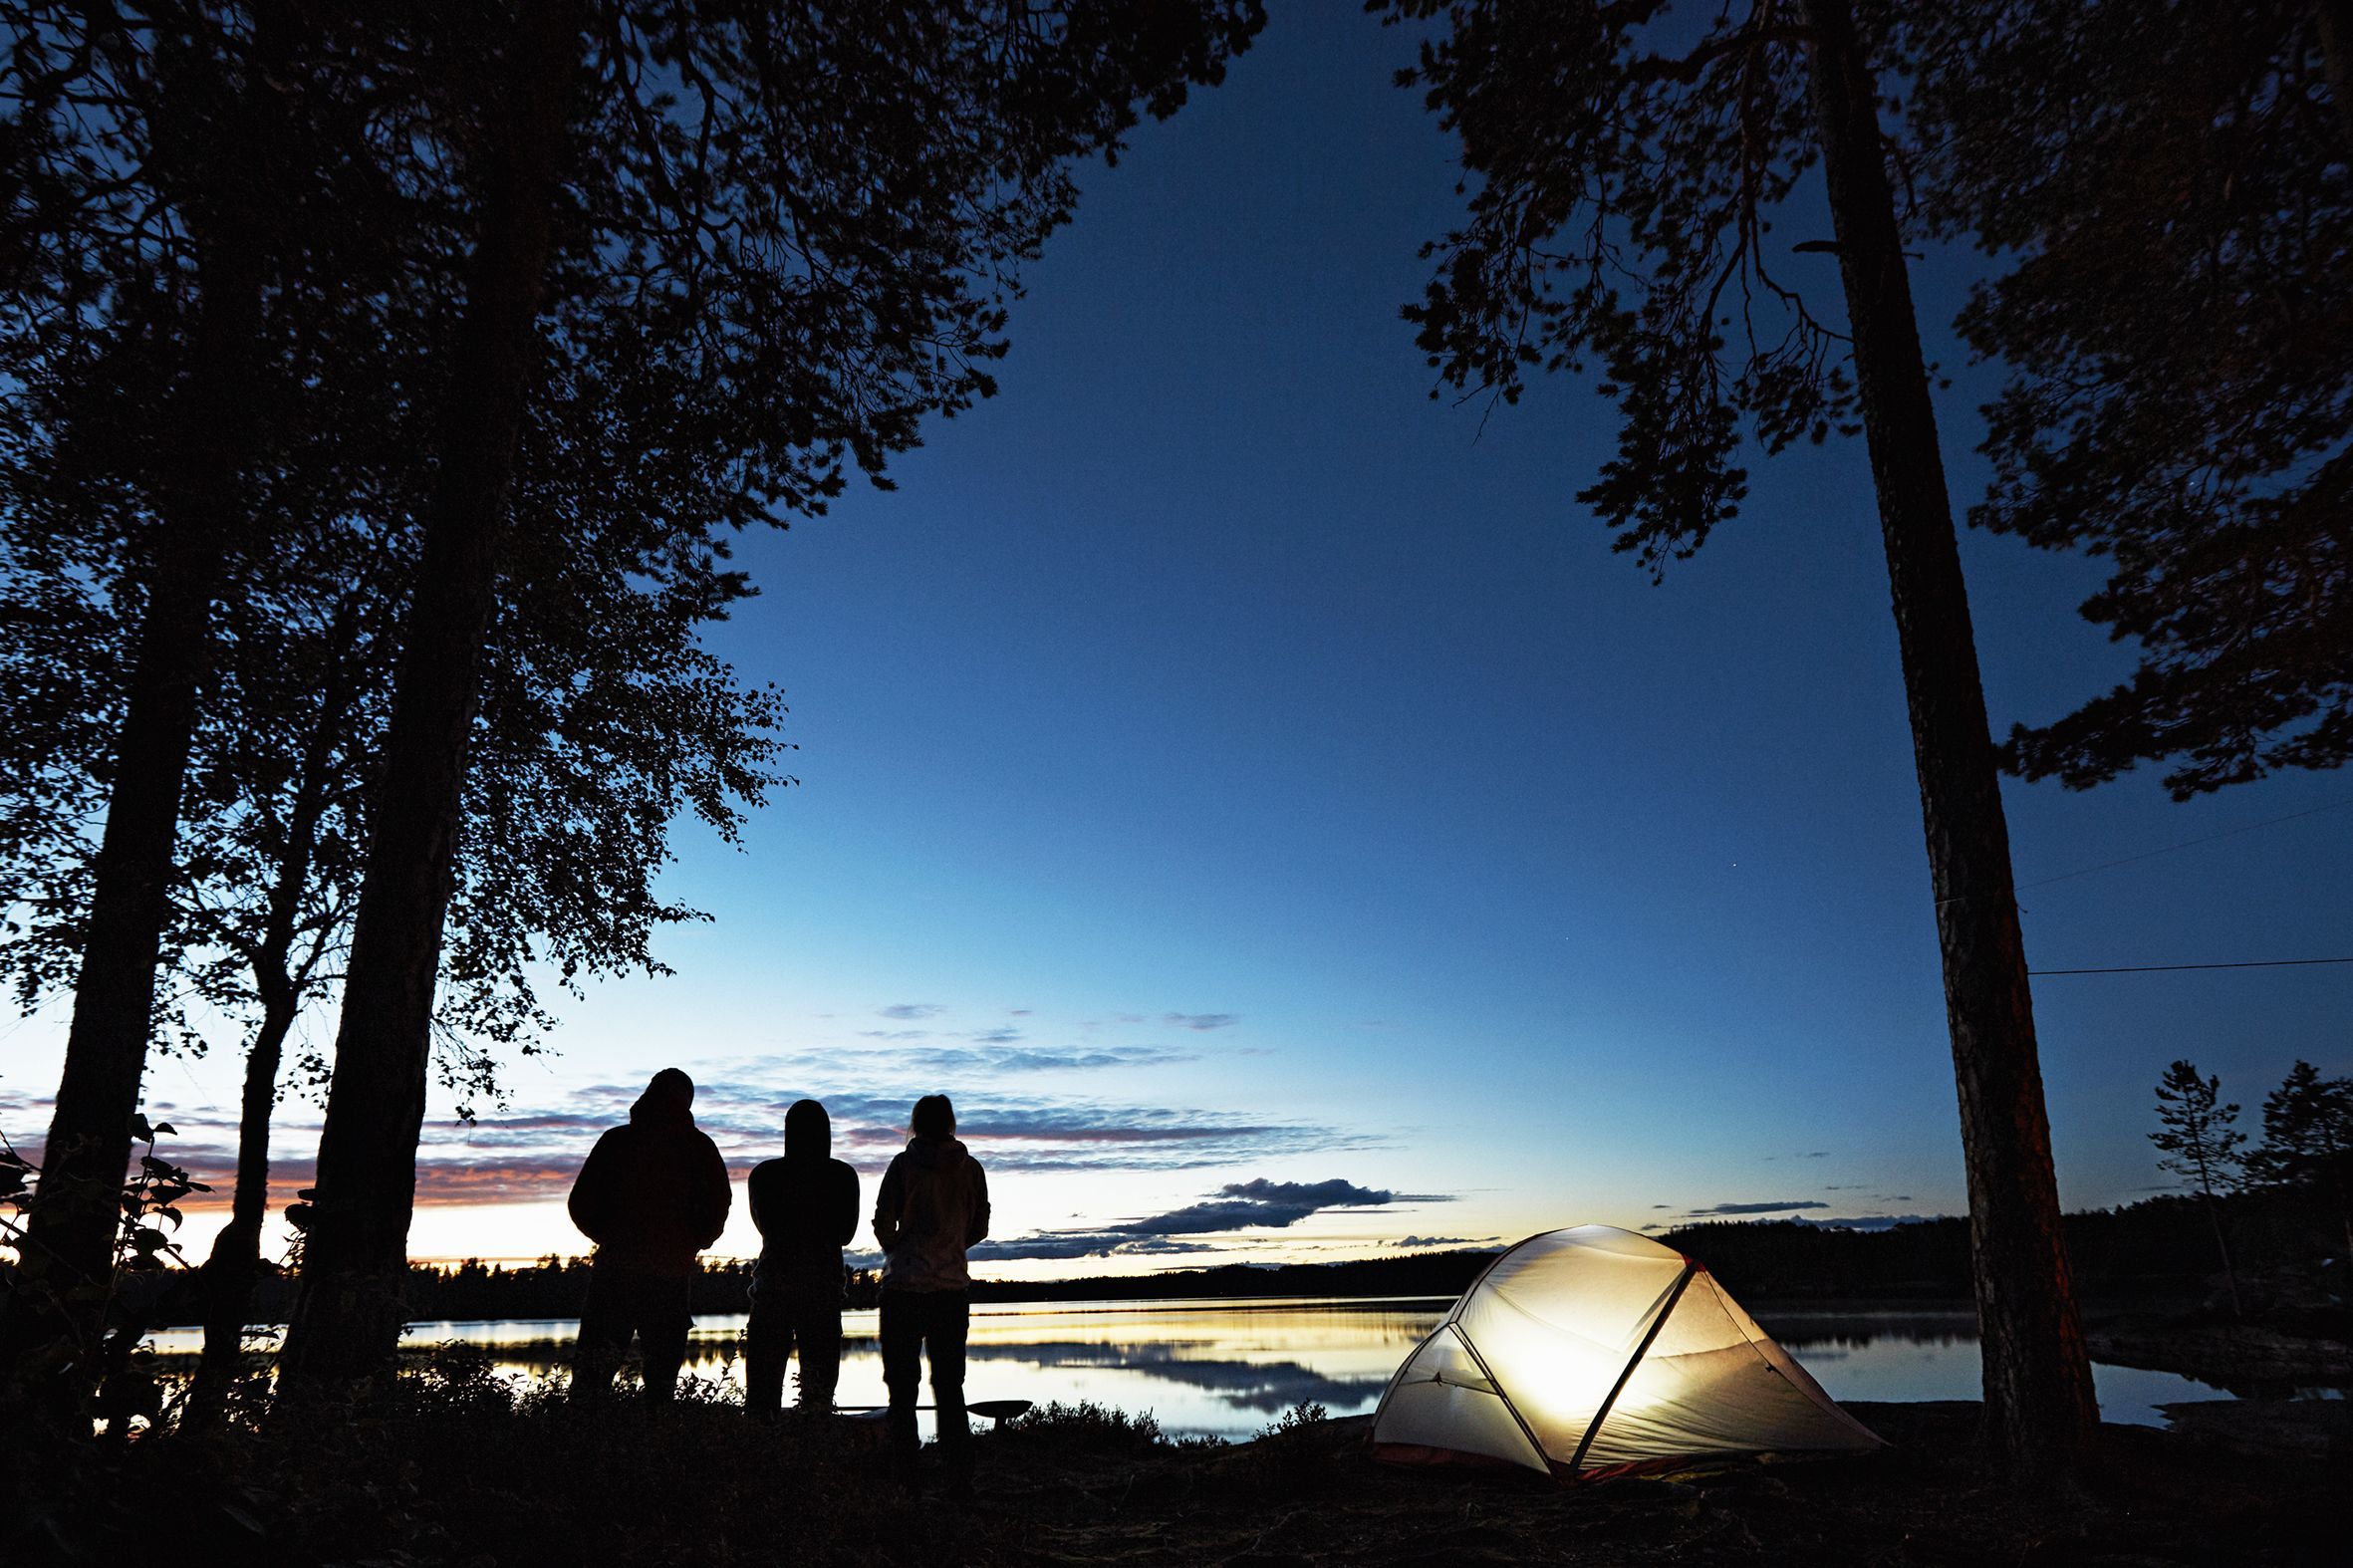 Silhouette of three people standing next to their lit tent under black trees by a lake near Oslo, Norway.